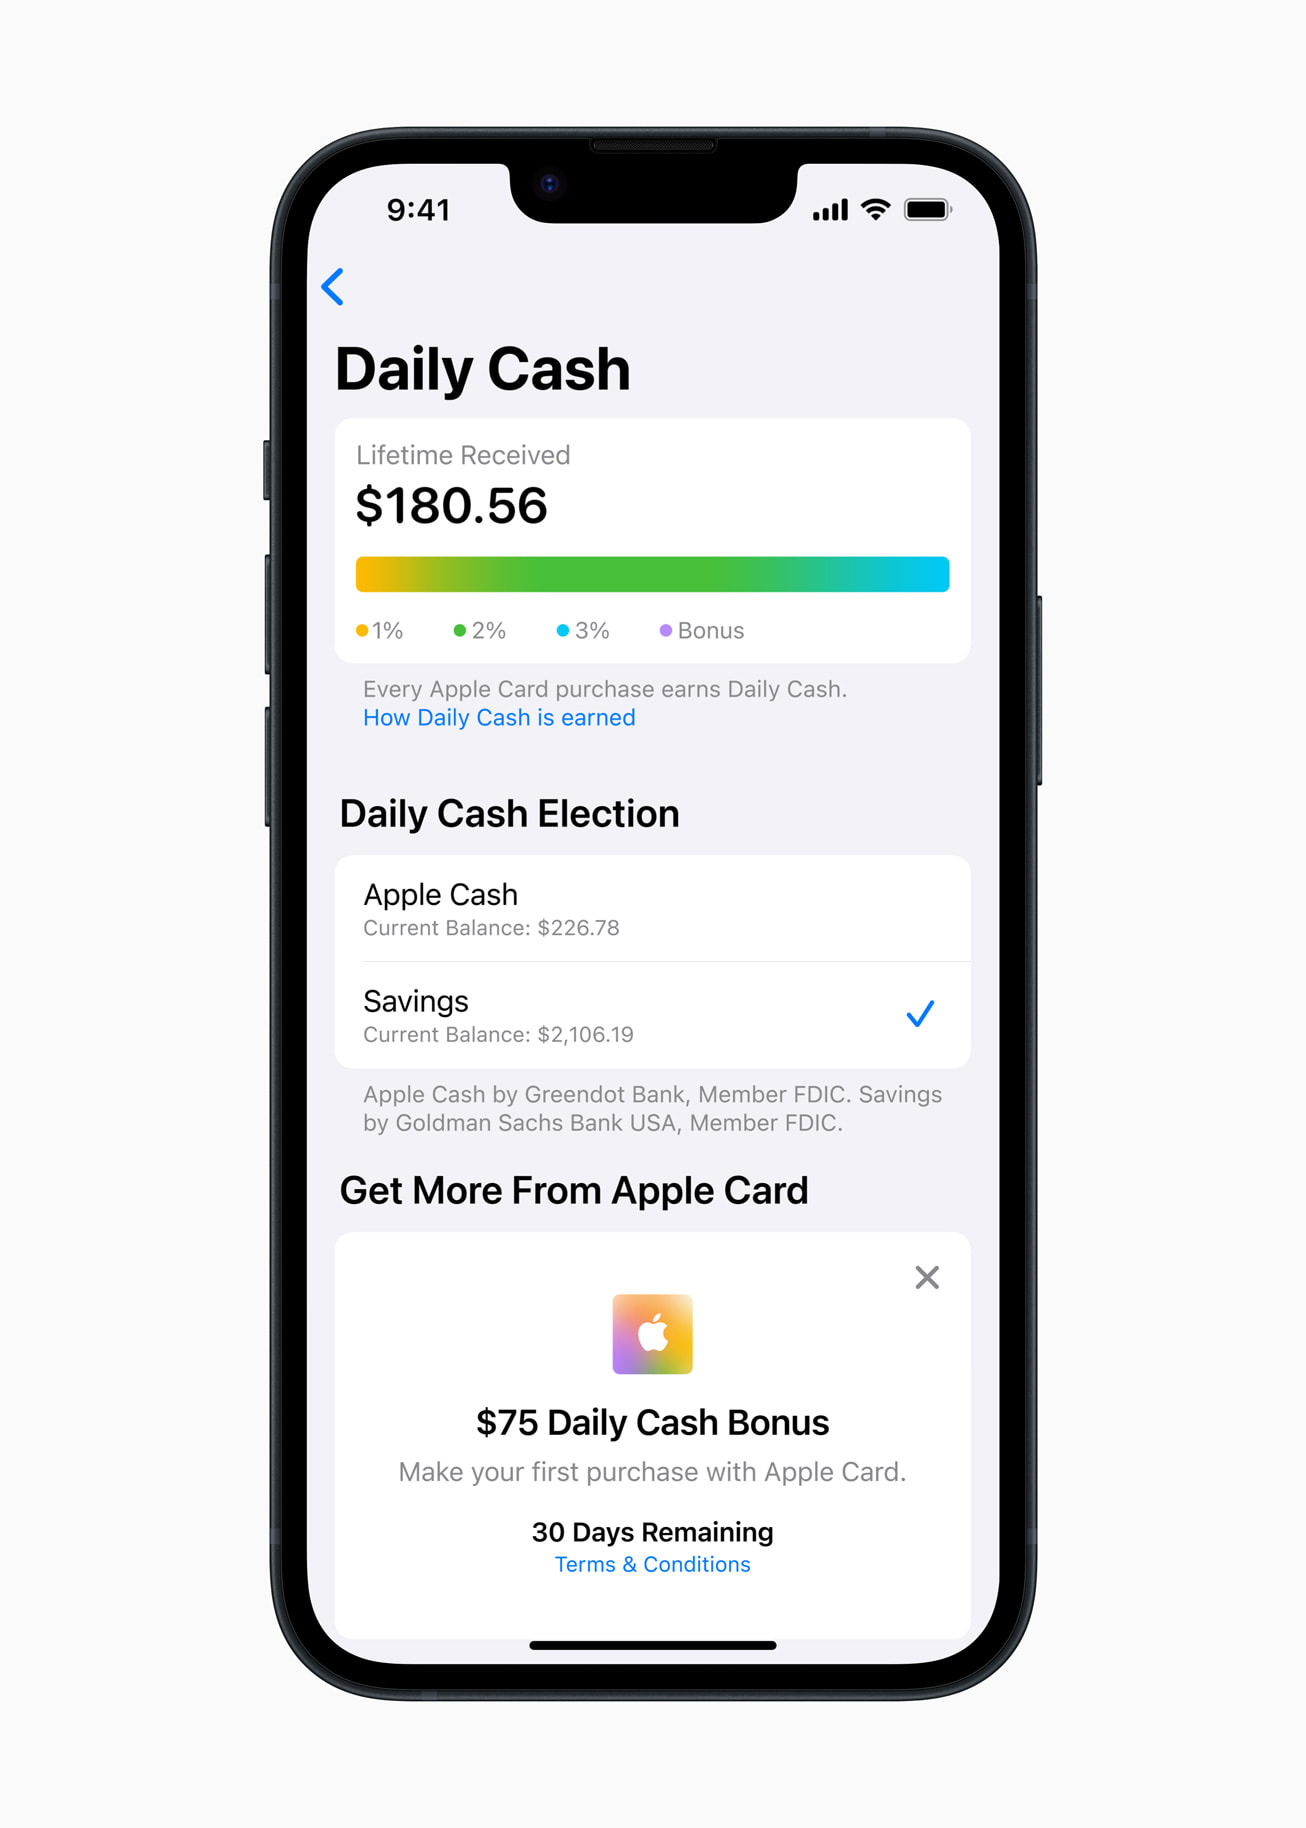 Apple Card will let users grow Daily Cash rewards while saving for the